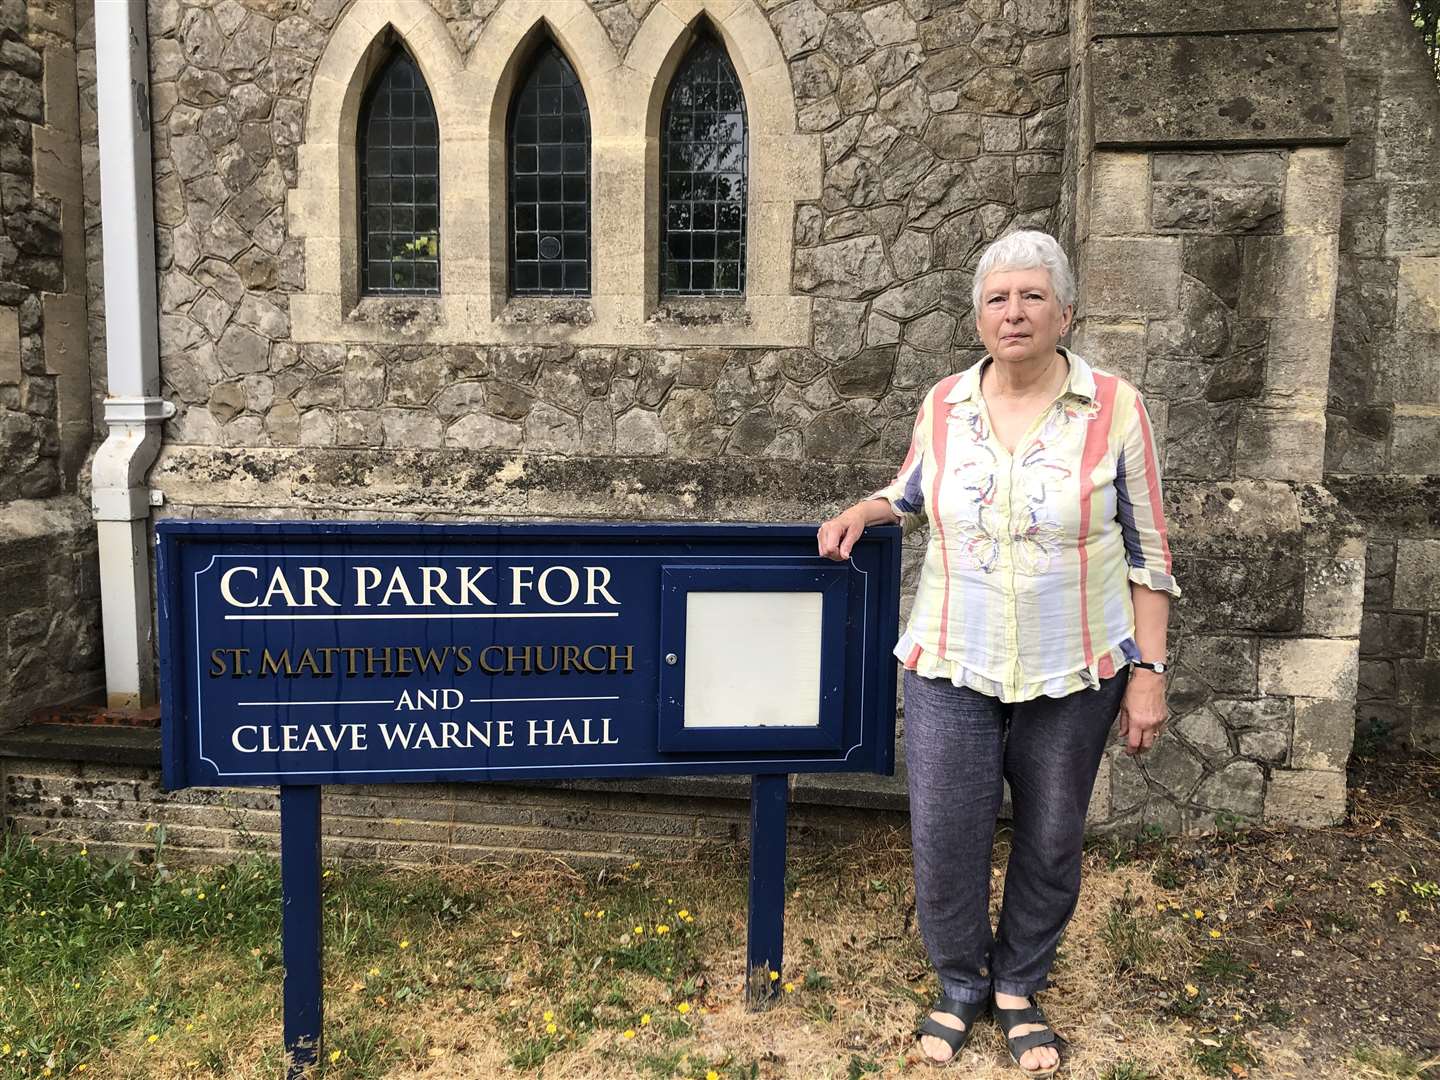 Churchwarden Alison Robinson is frustrated at the amount of people "abusing" the car park